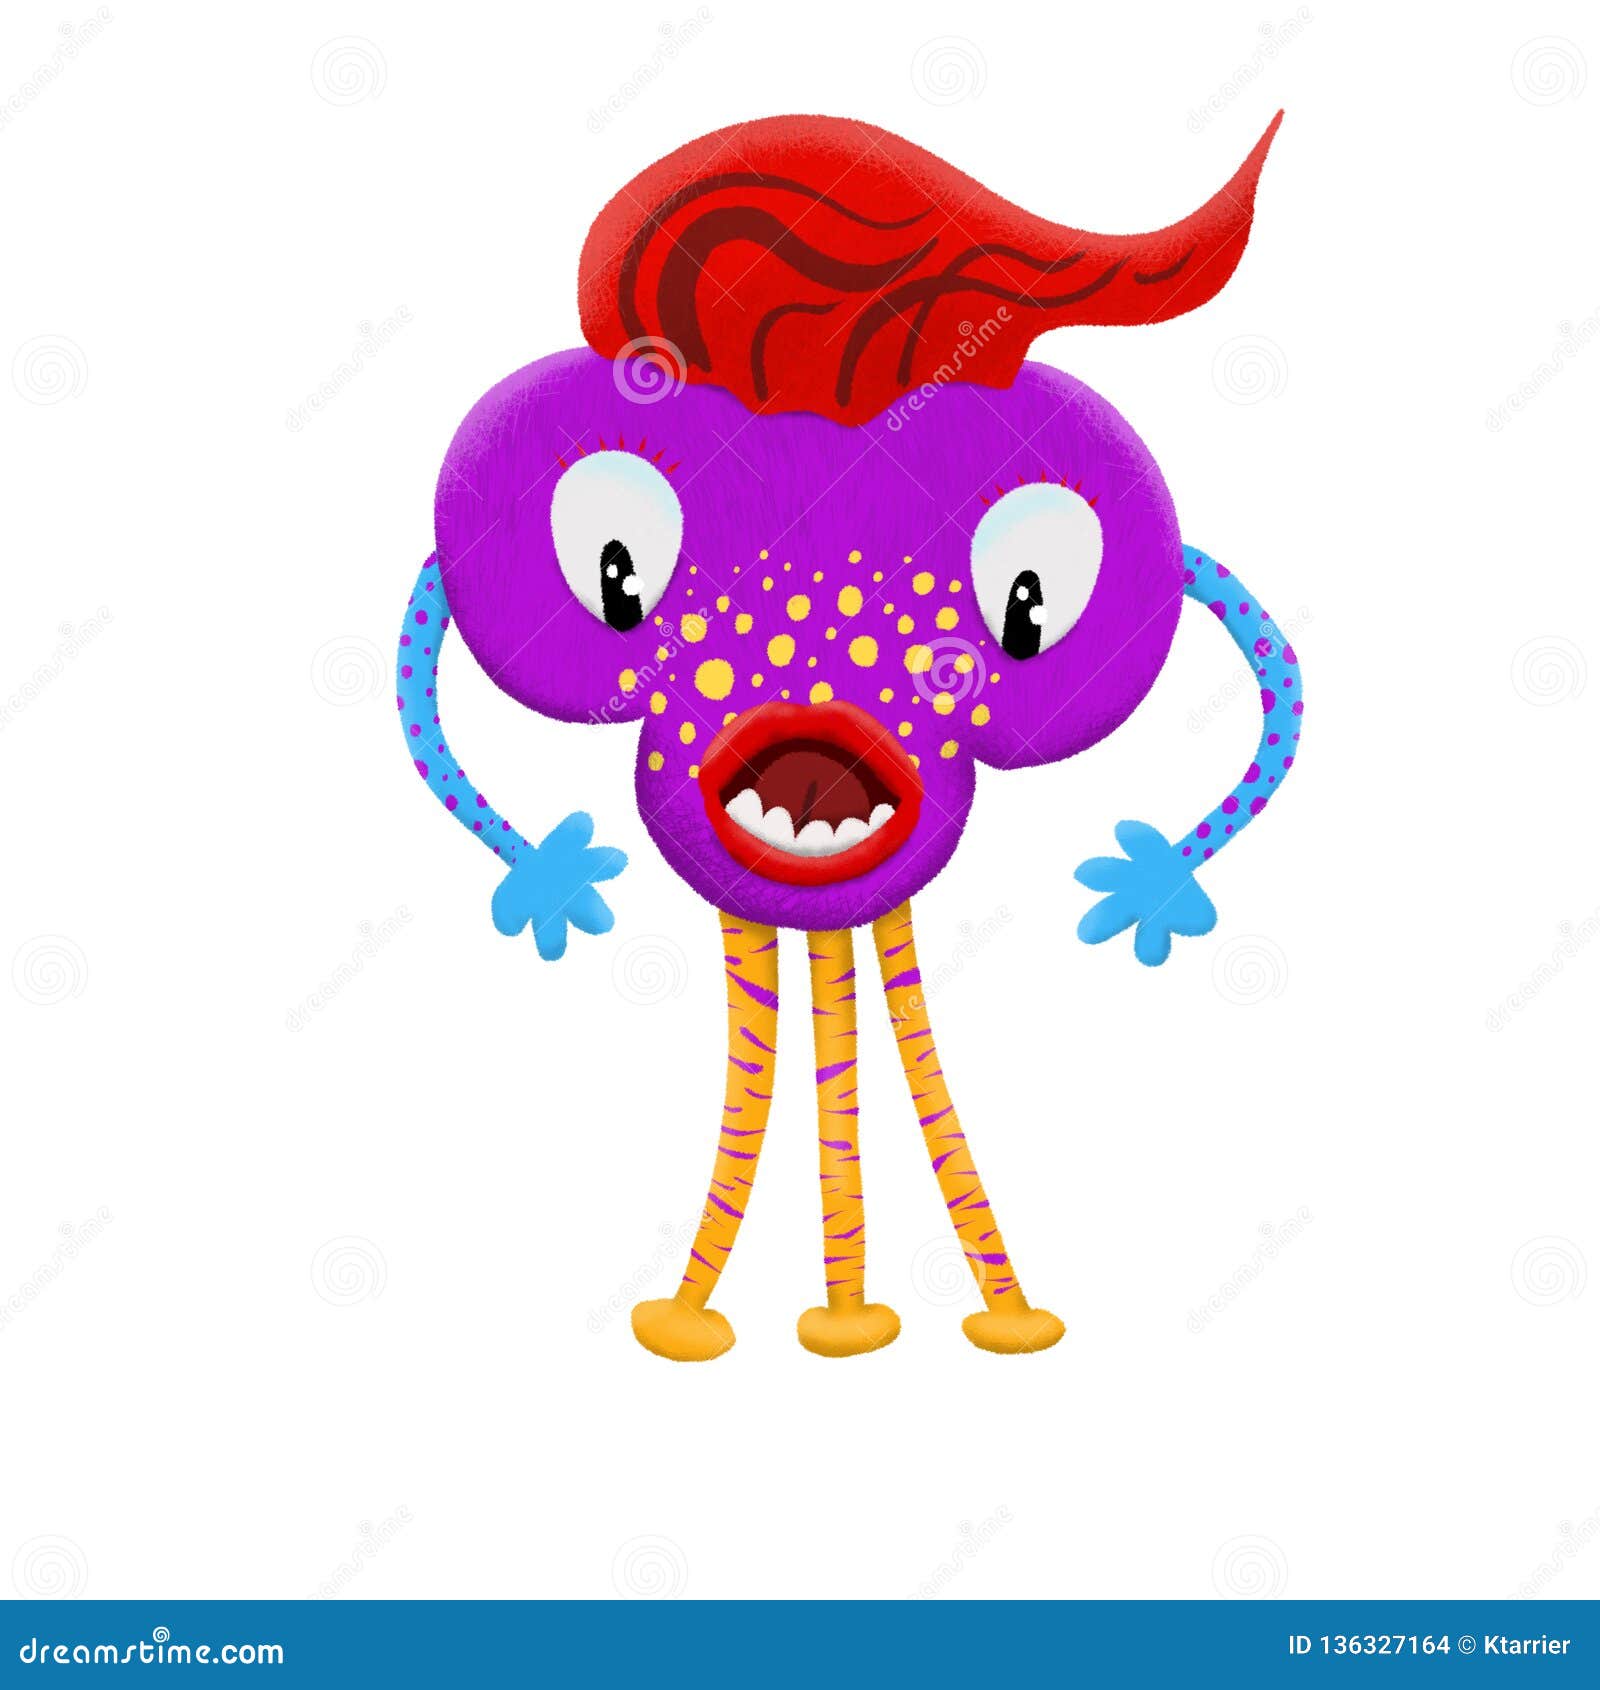 cute-colorful-monster-cartoon-character-